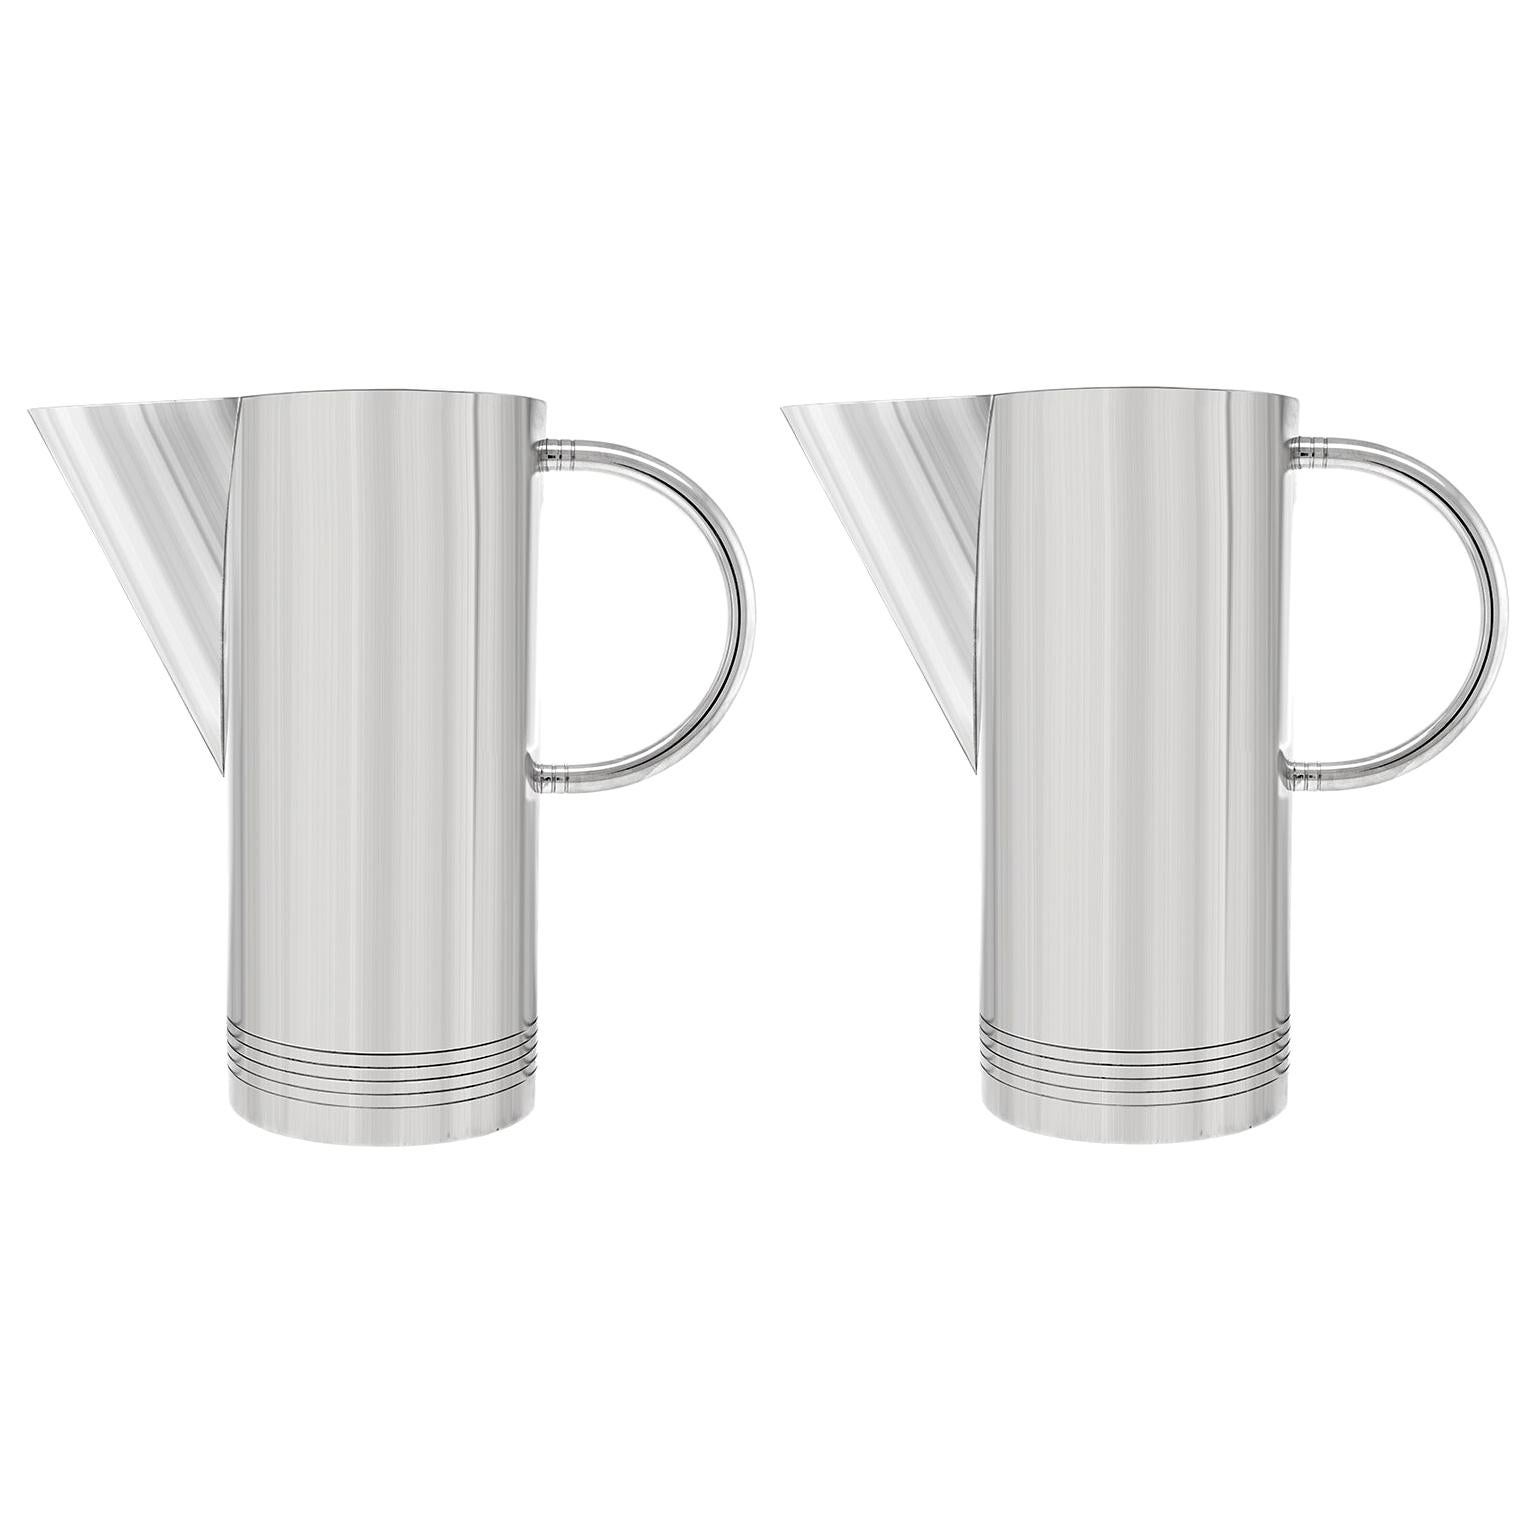 Pair of Post Modern Silverplate Water Pitchers by Richard Meier for Swid Powell